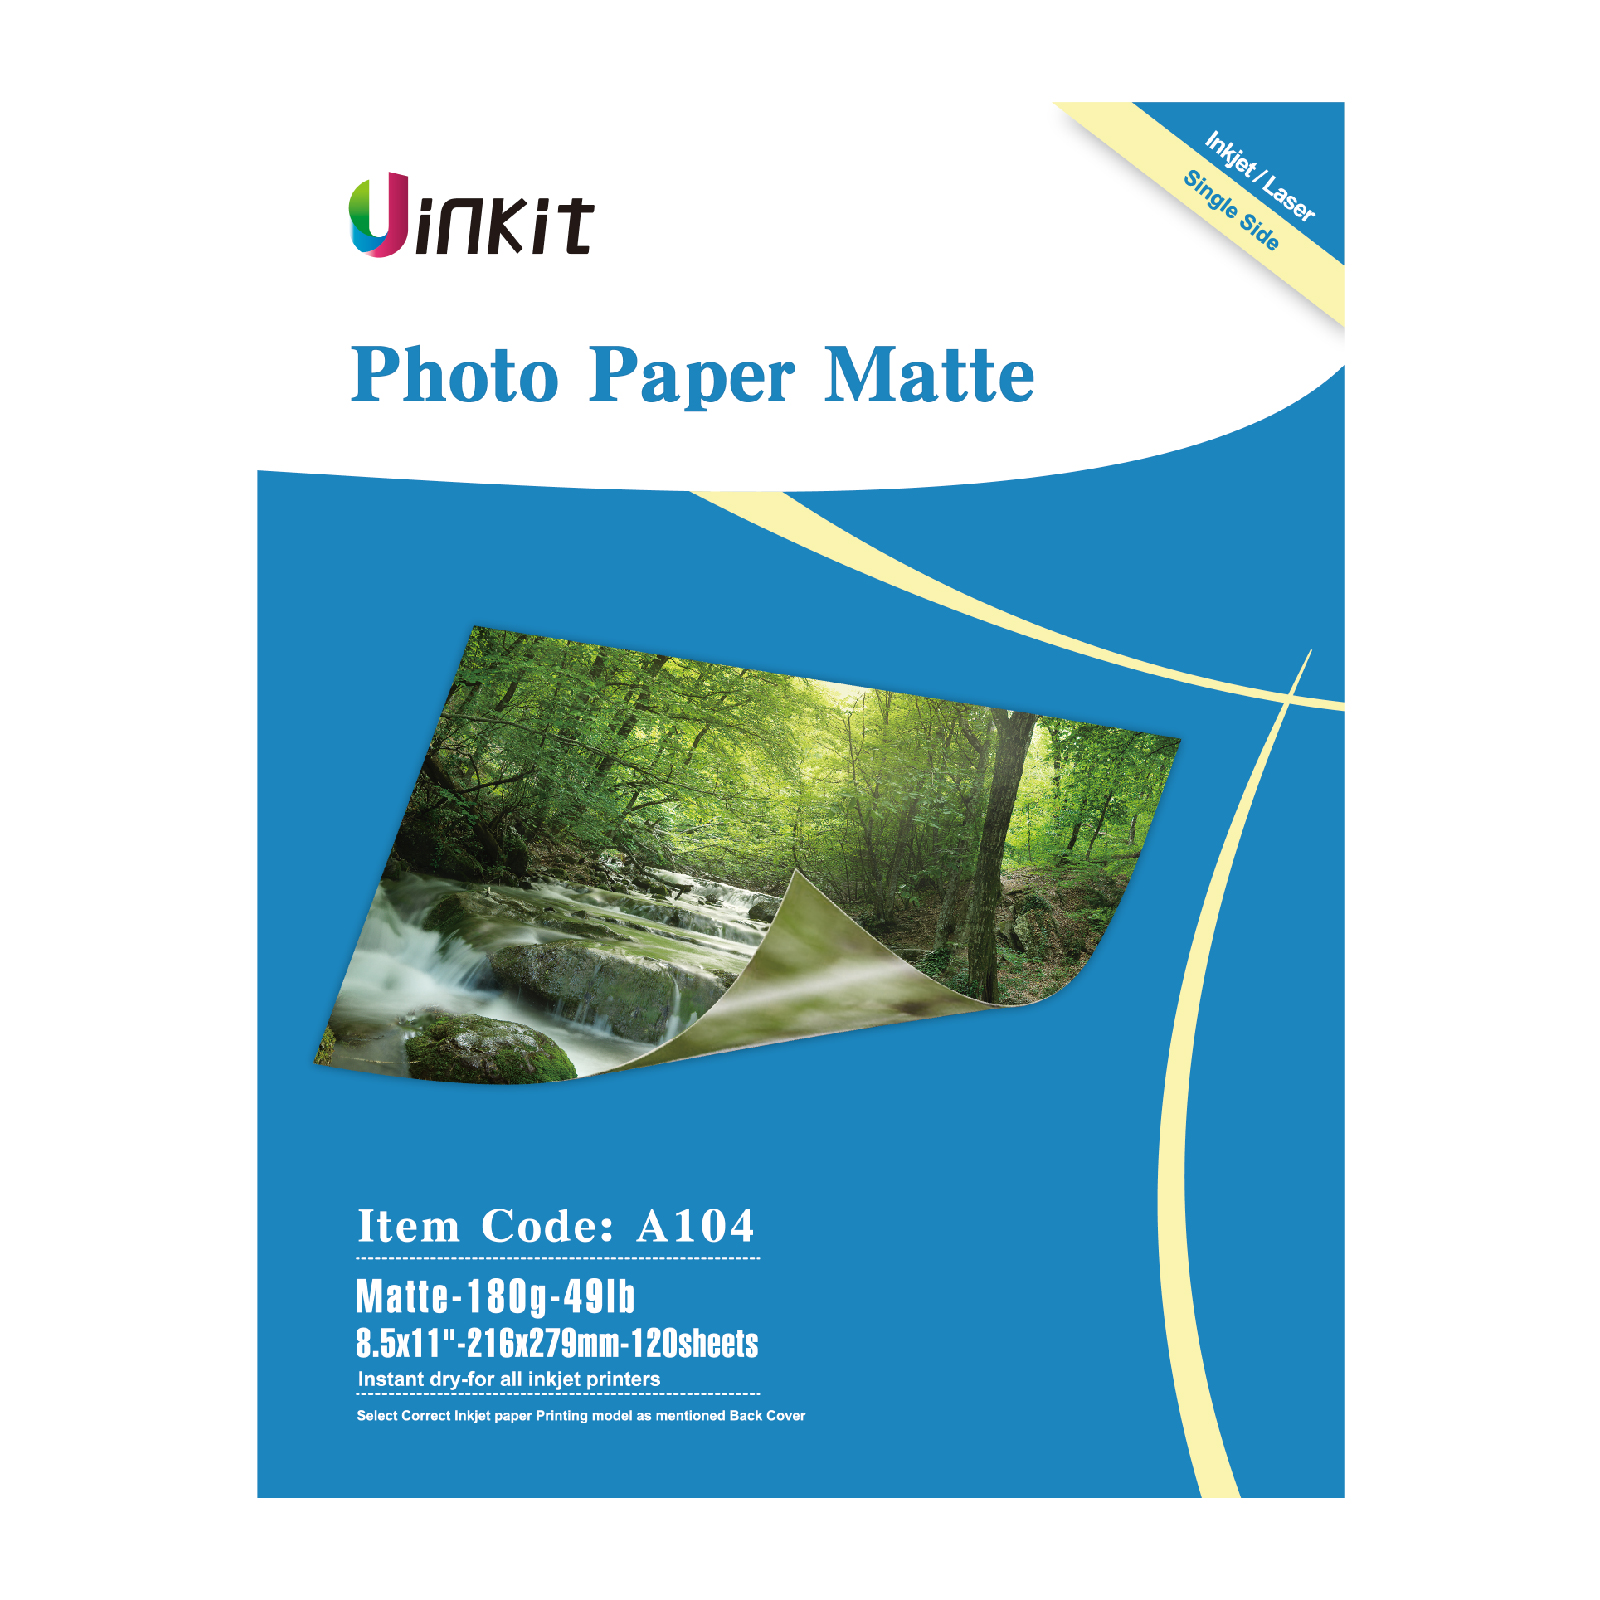 Uink Thick Heavyweight Double Sided Glossy Photo Paper 100 Sheets 80lb